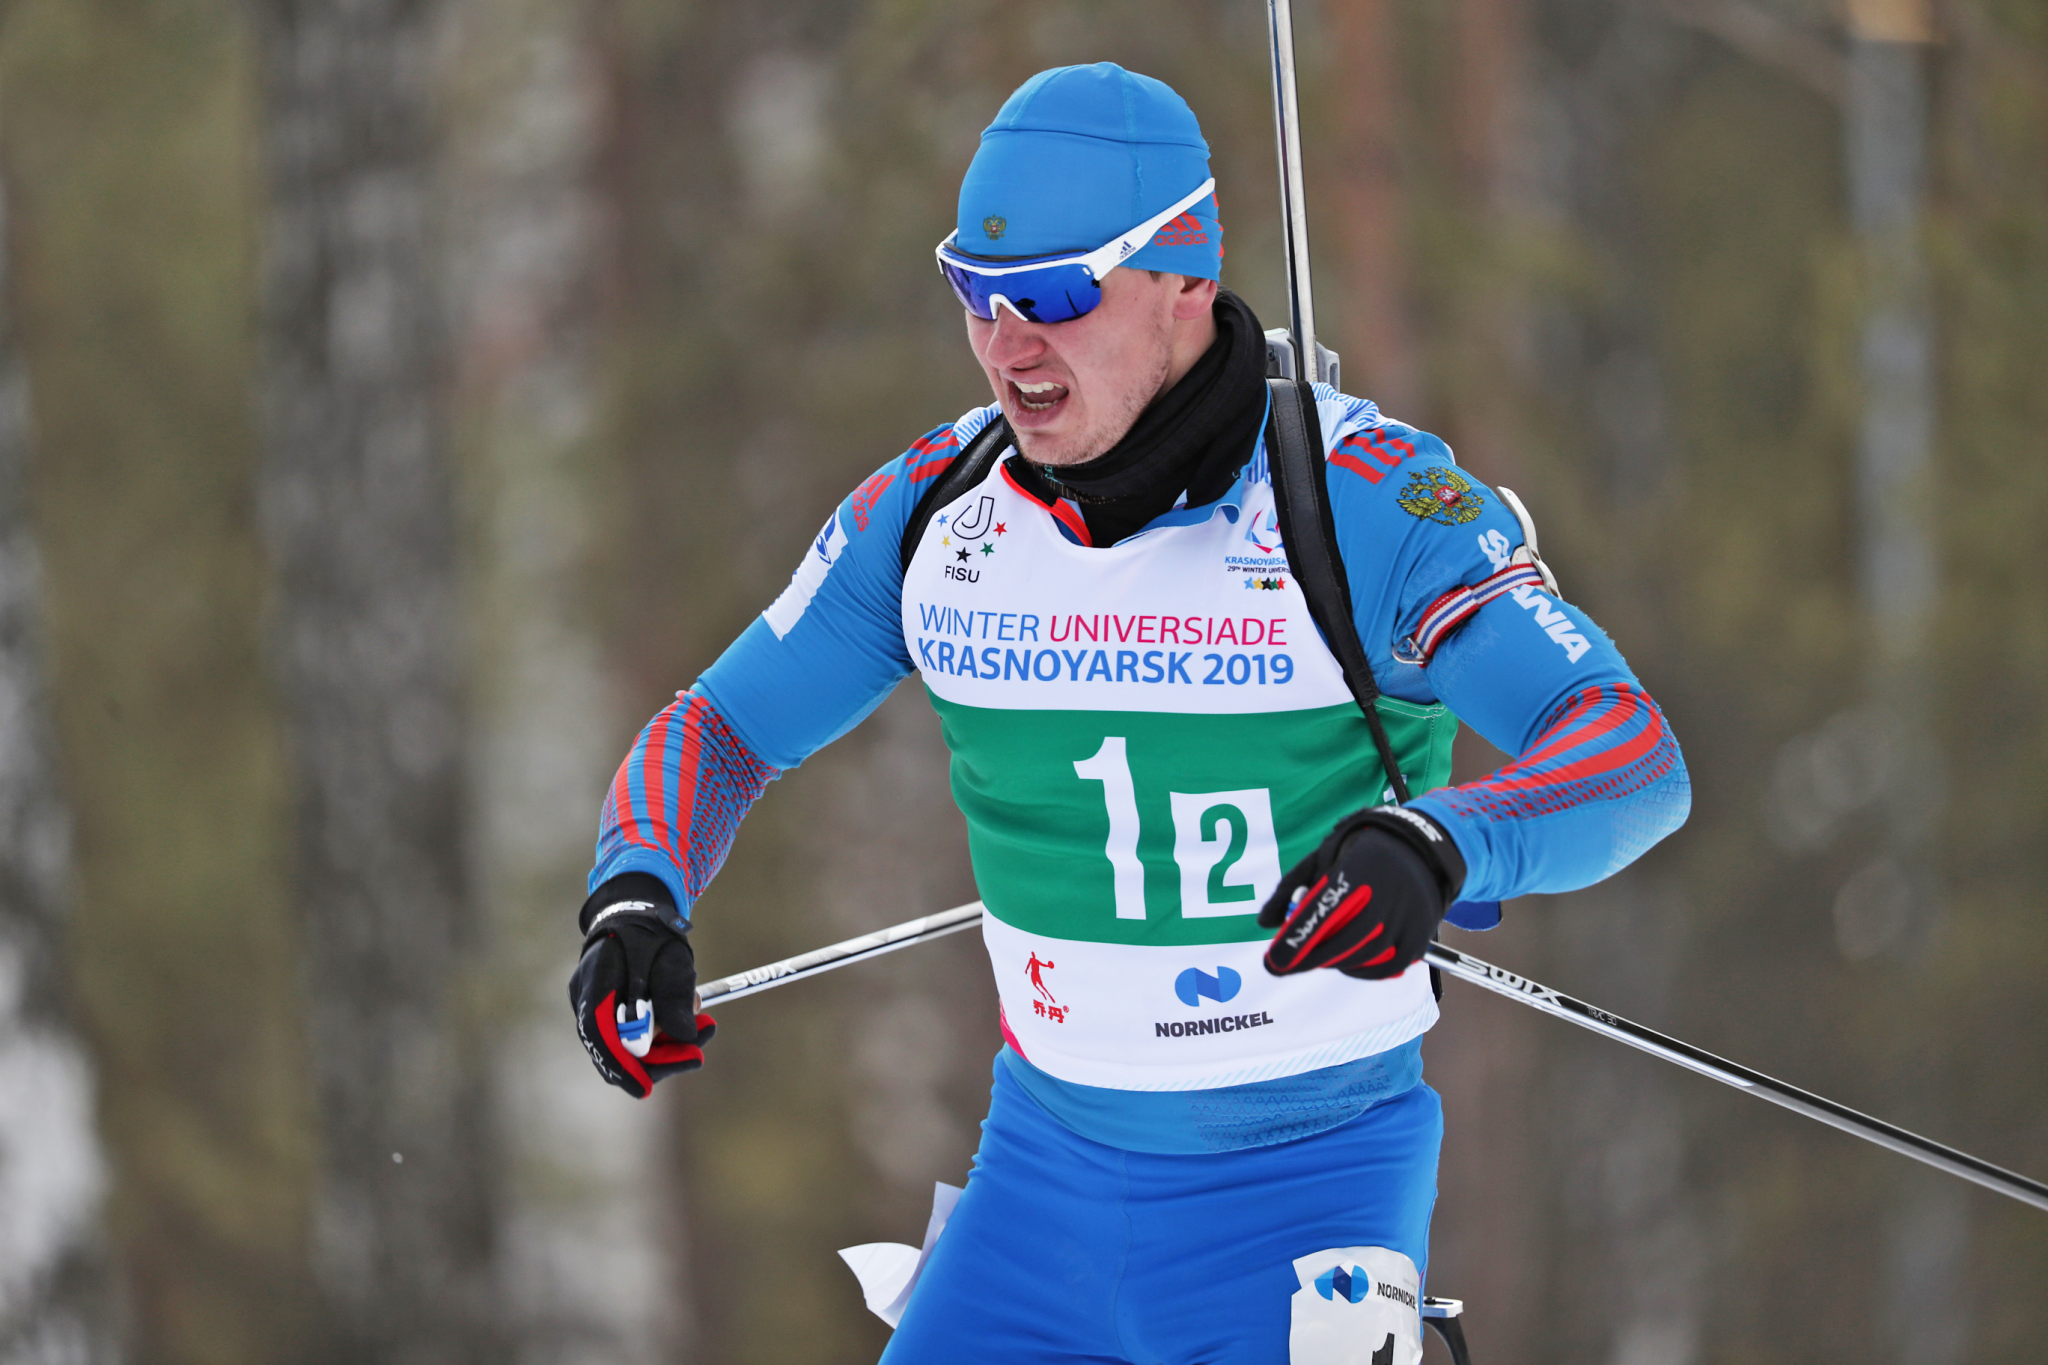 Russia's biathlon domination was tested but not ended by the Czech Republic ©Krasnoyarsk 2019